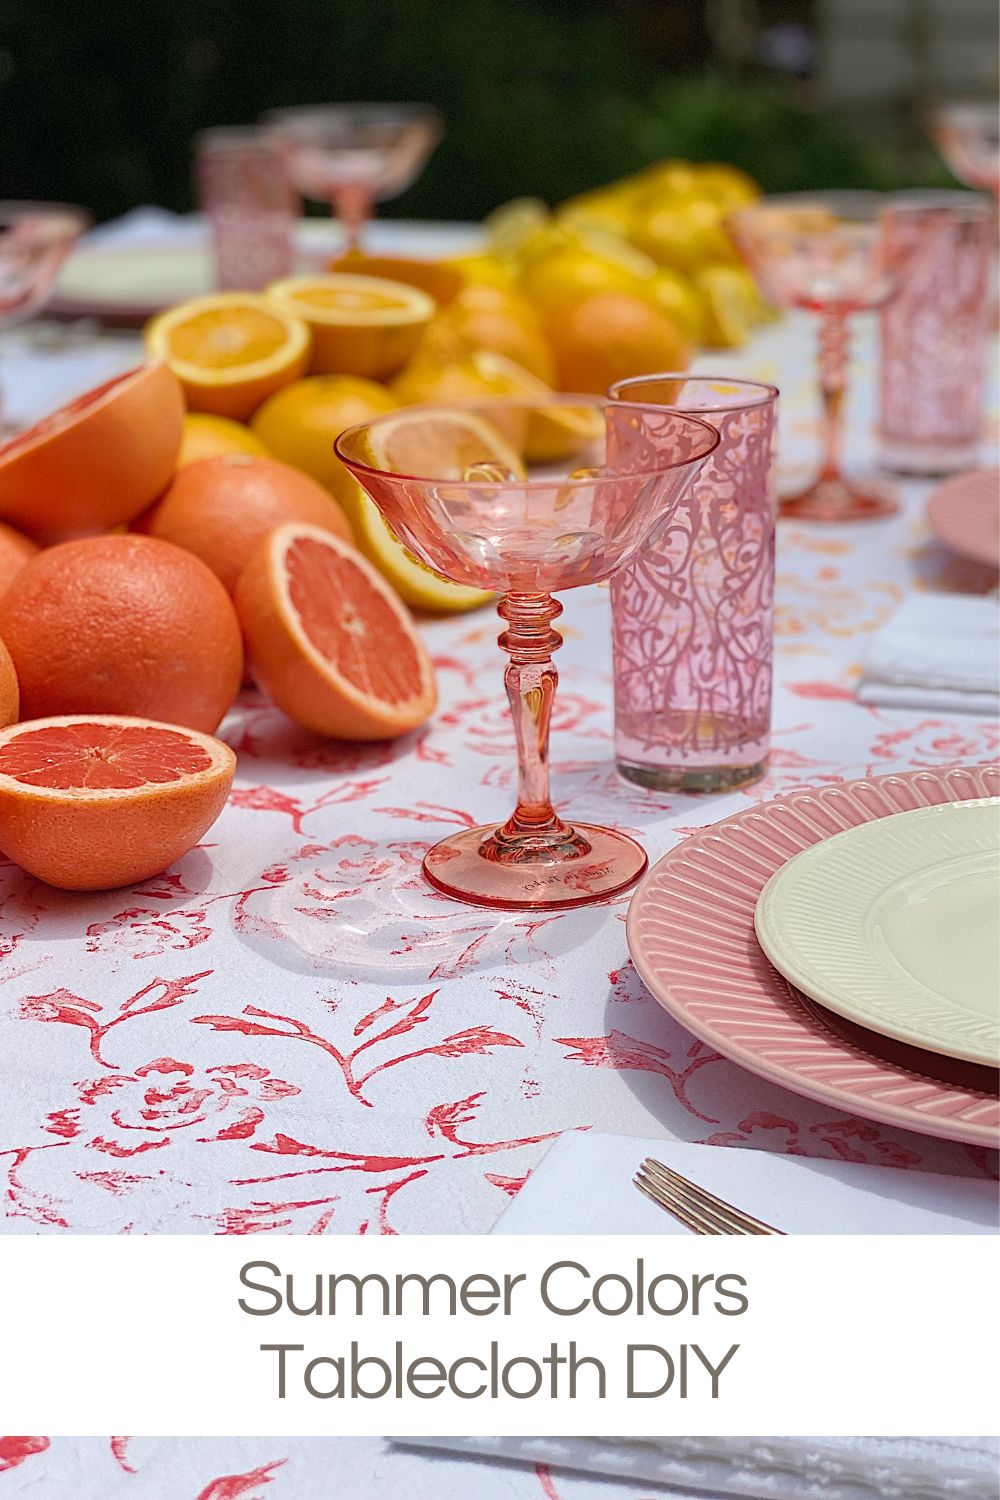 I love how I rescued this stained tablecloth by painting it in summer colors with a paint roller. It looks perfect on my citrus-themed table!